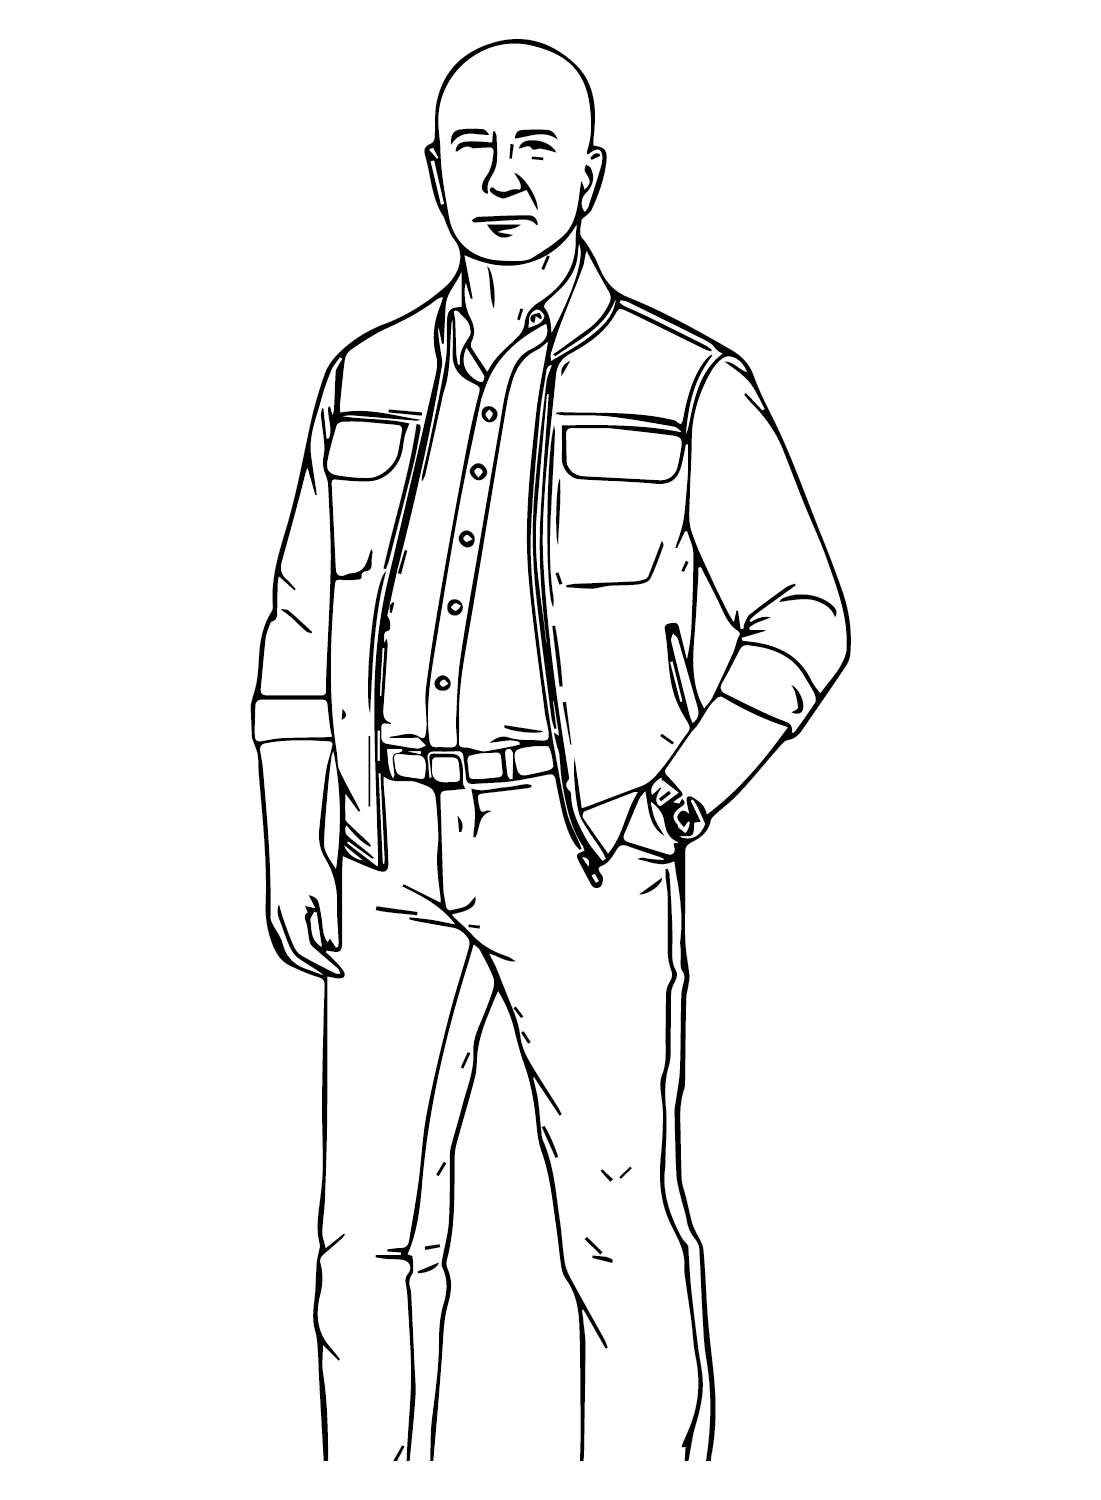 Jeff Bezos for Kids Coloring Page